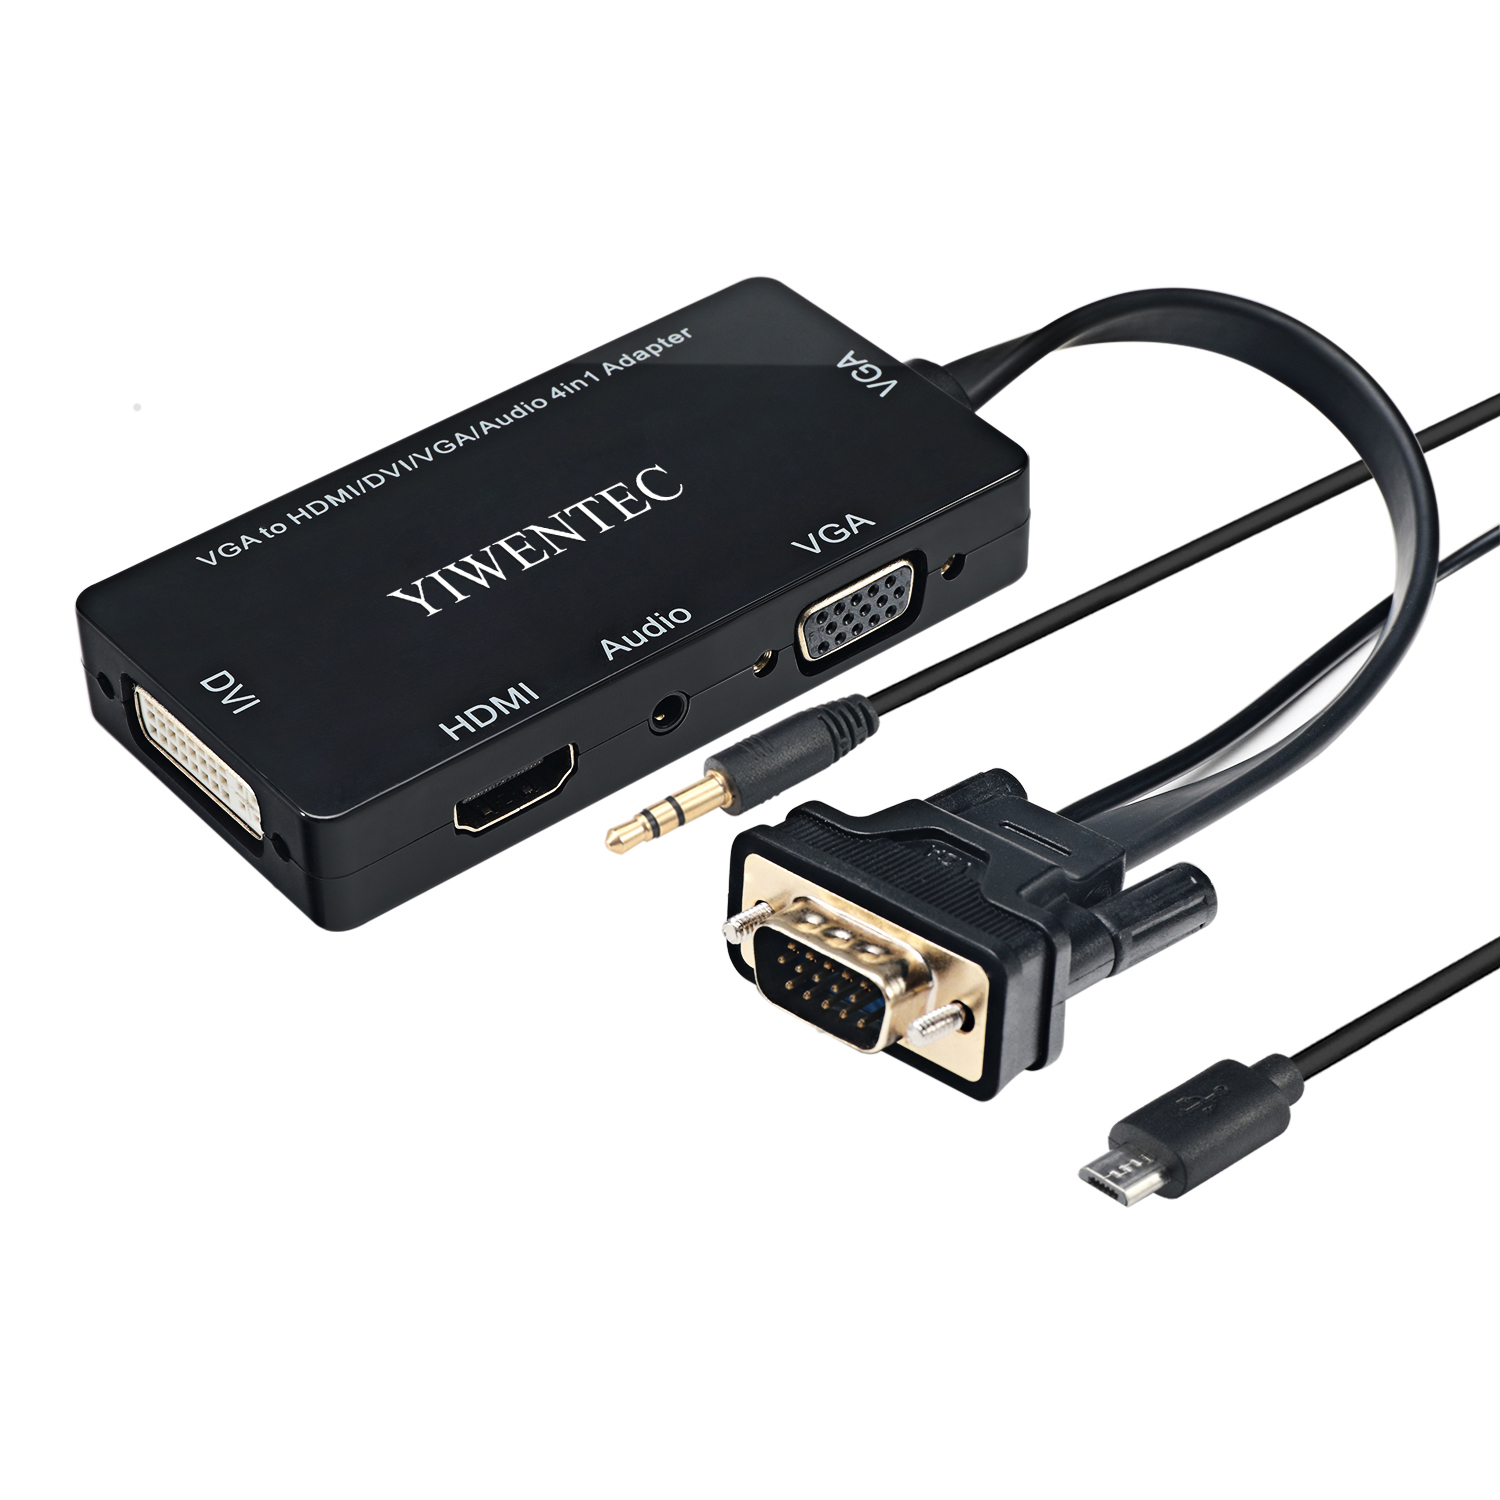 YIWENTEC VGA Male VGA HDMI DVI Female 3IN1 Adapter Converter for Desktop Laptop VGA Graphics Card with Micro USB Power Cable and Audio 3.5mm Jack Connect simultaneously E0409-HDMI To HDMI VGA